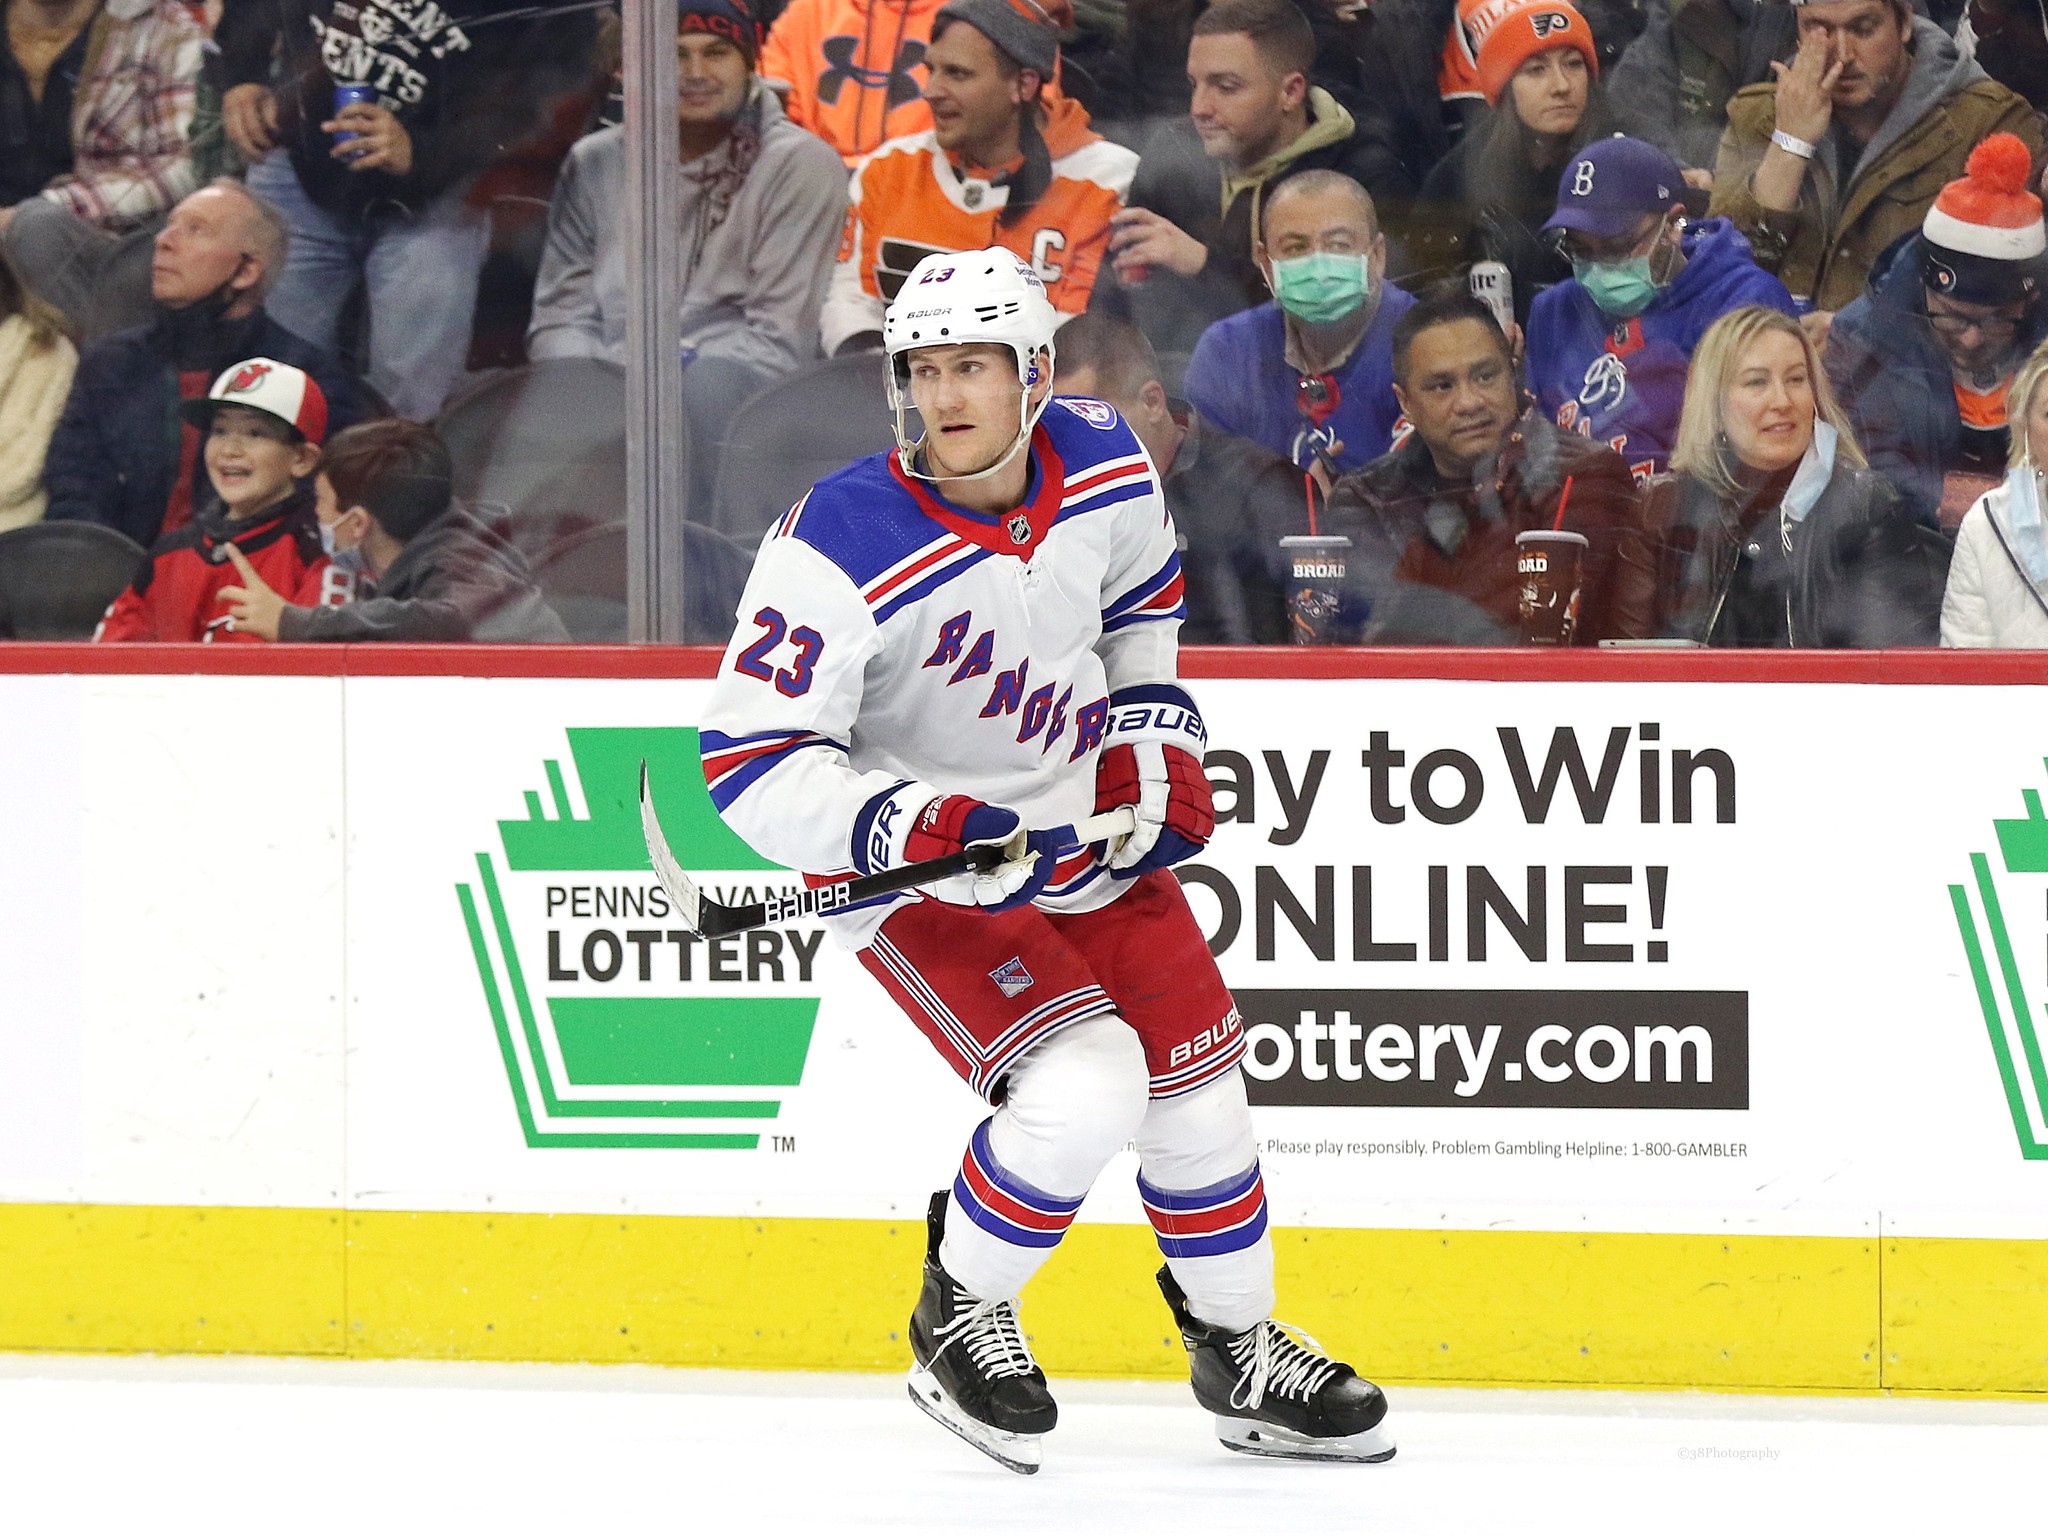 NY Rangers announce Filip Chytil expected to miss 4-6 weeks